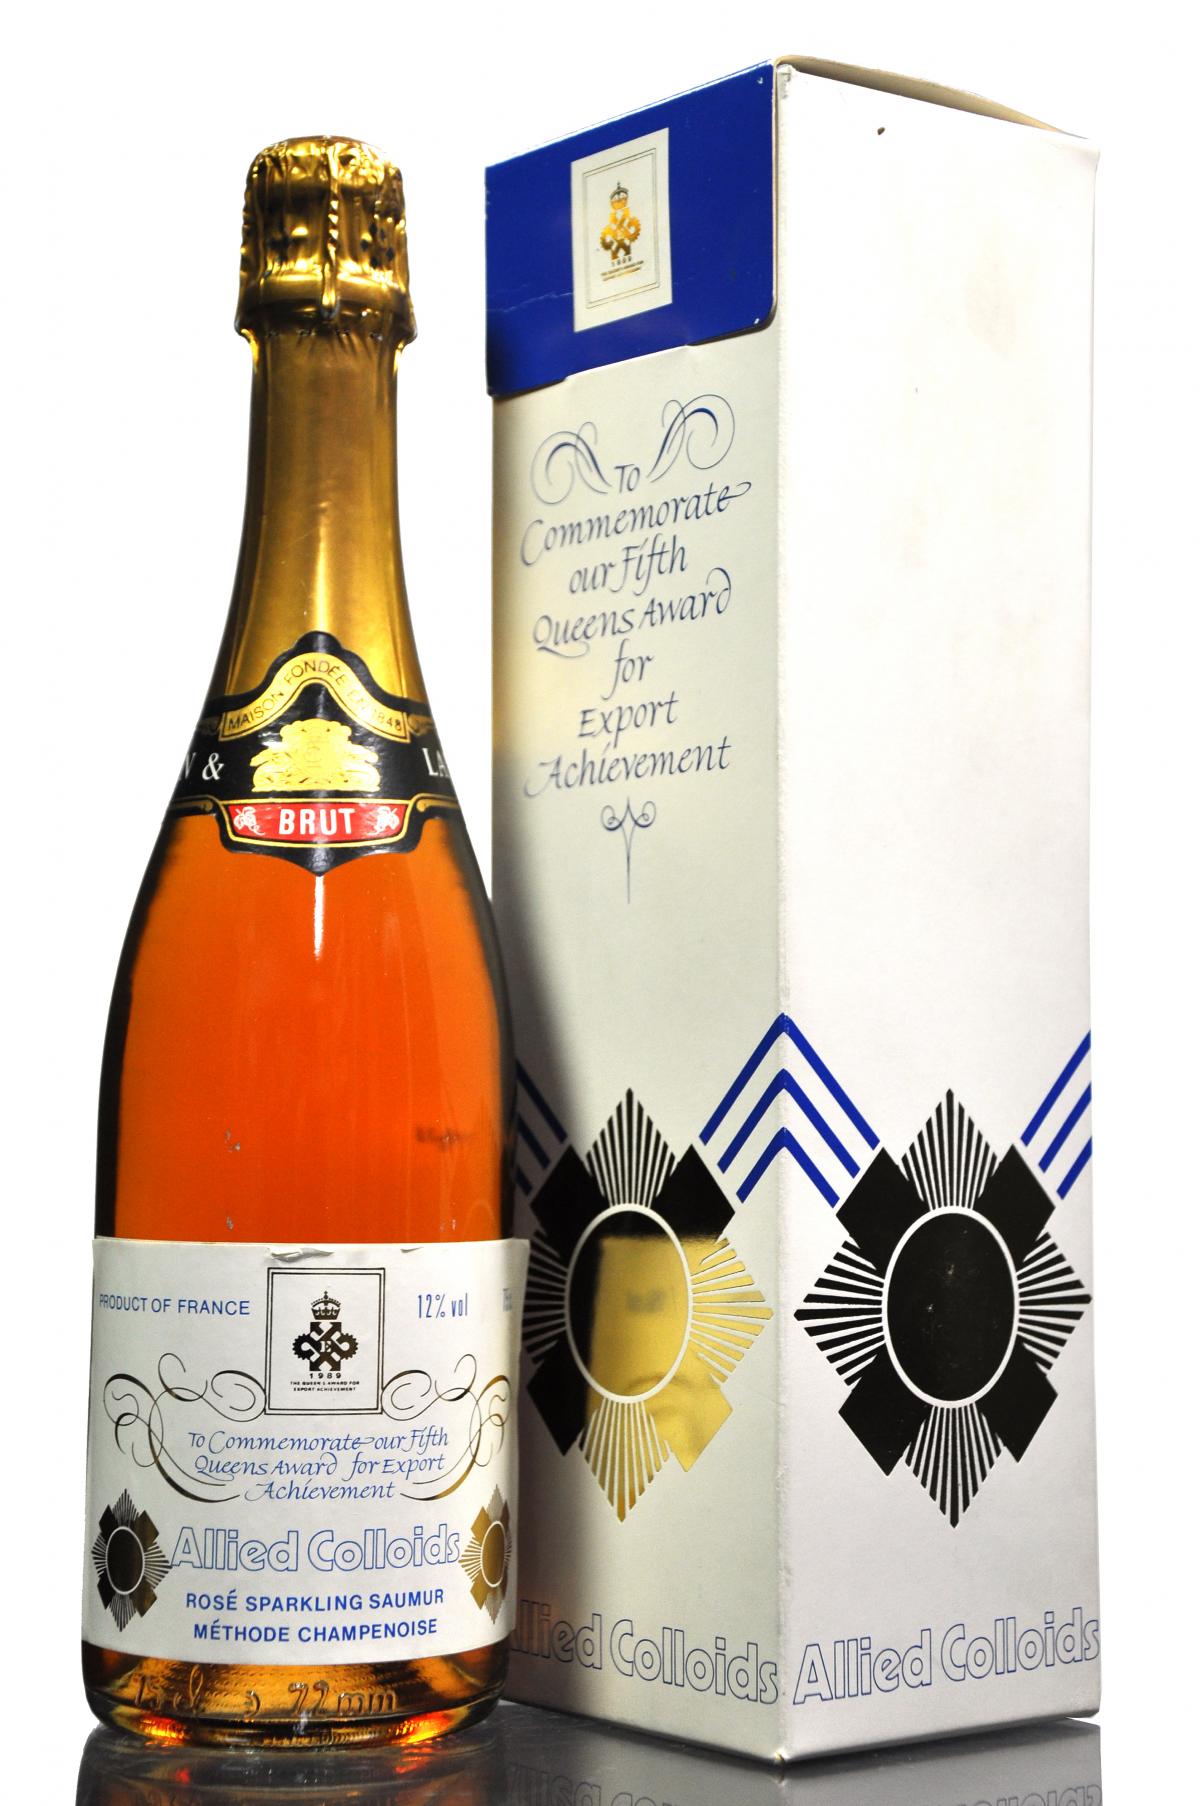 Queens Award Champagne - 1989